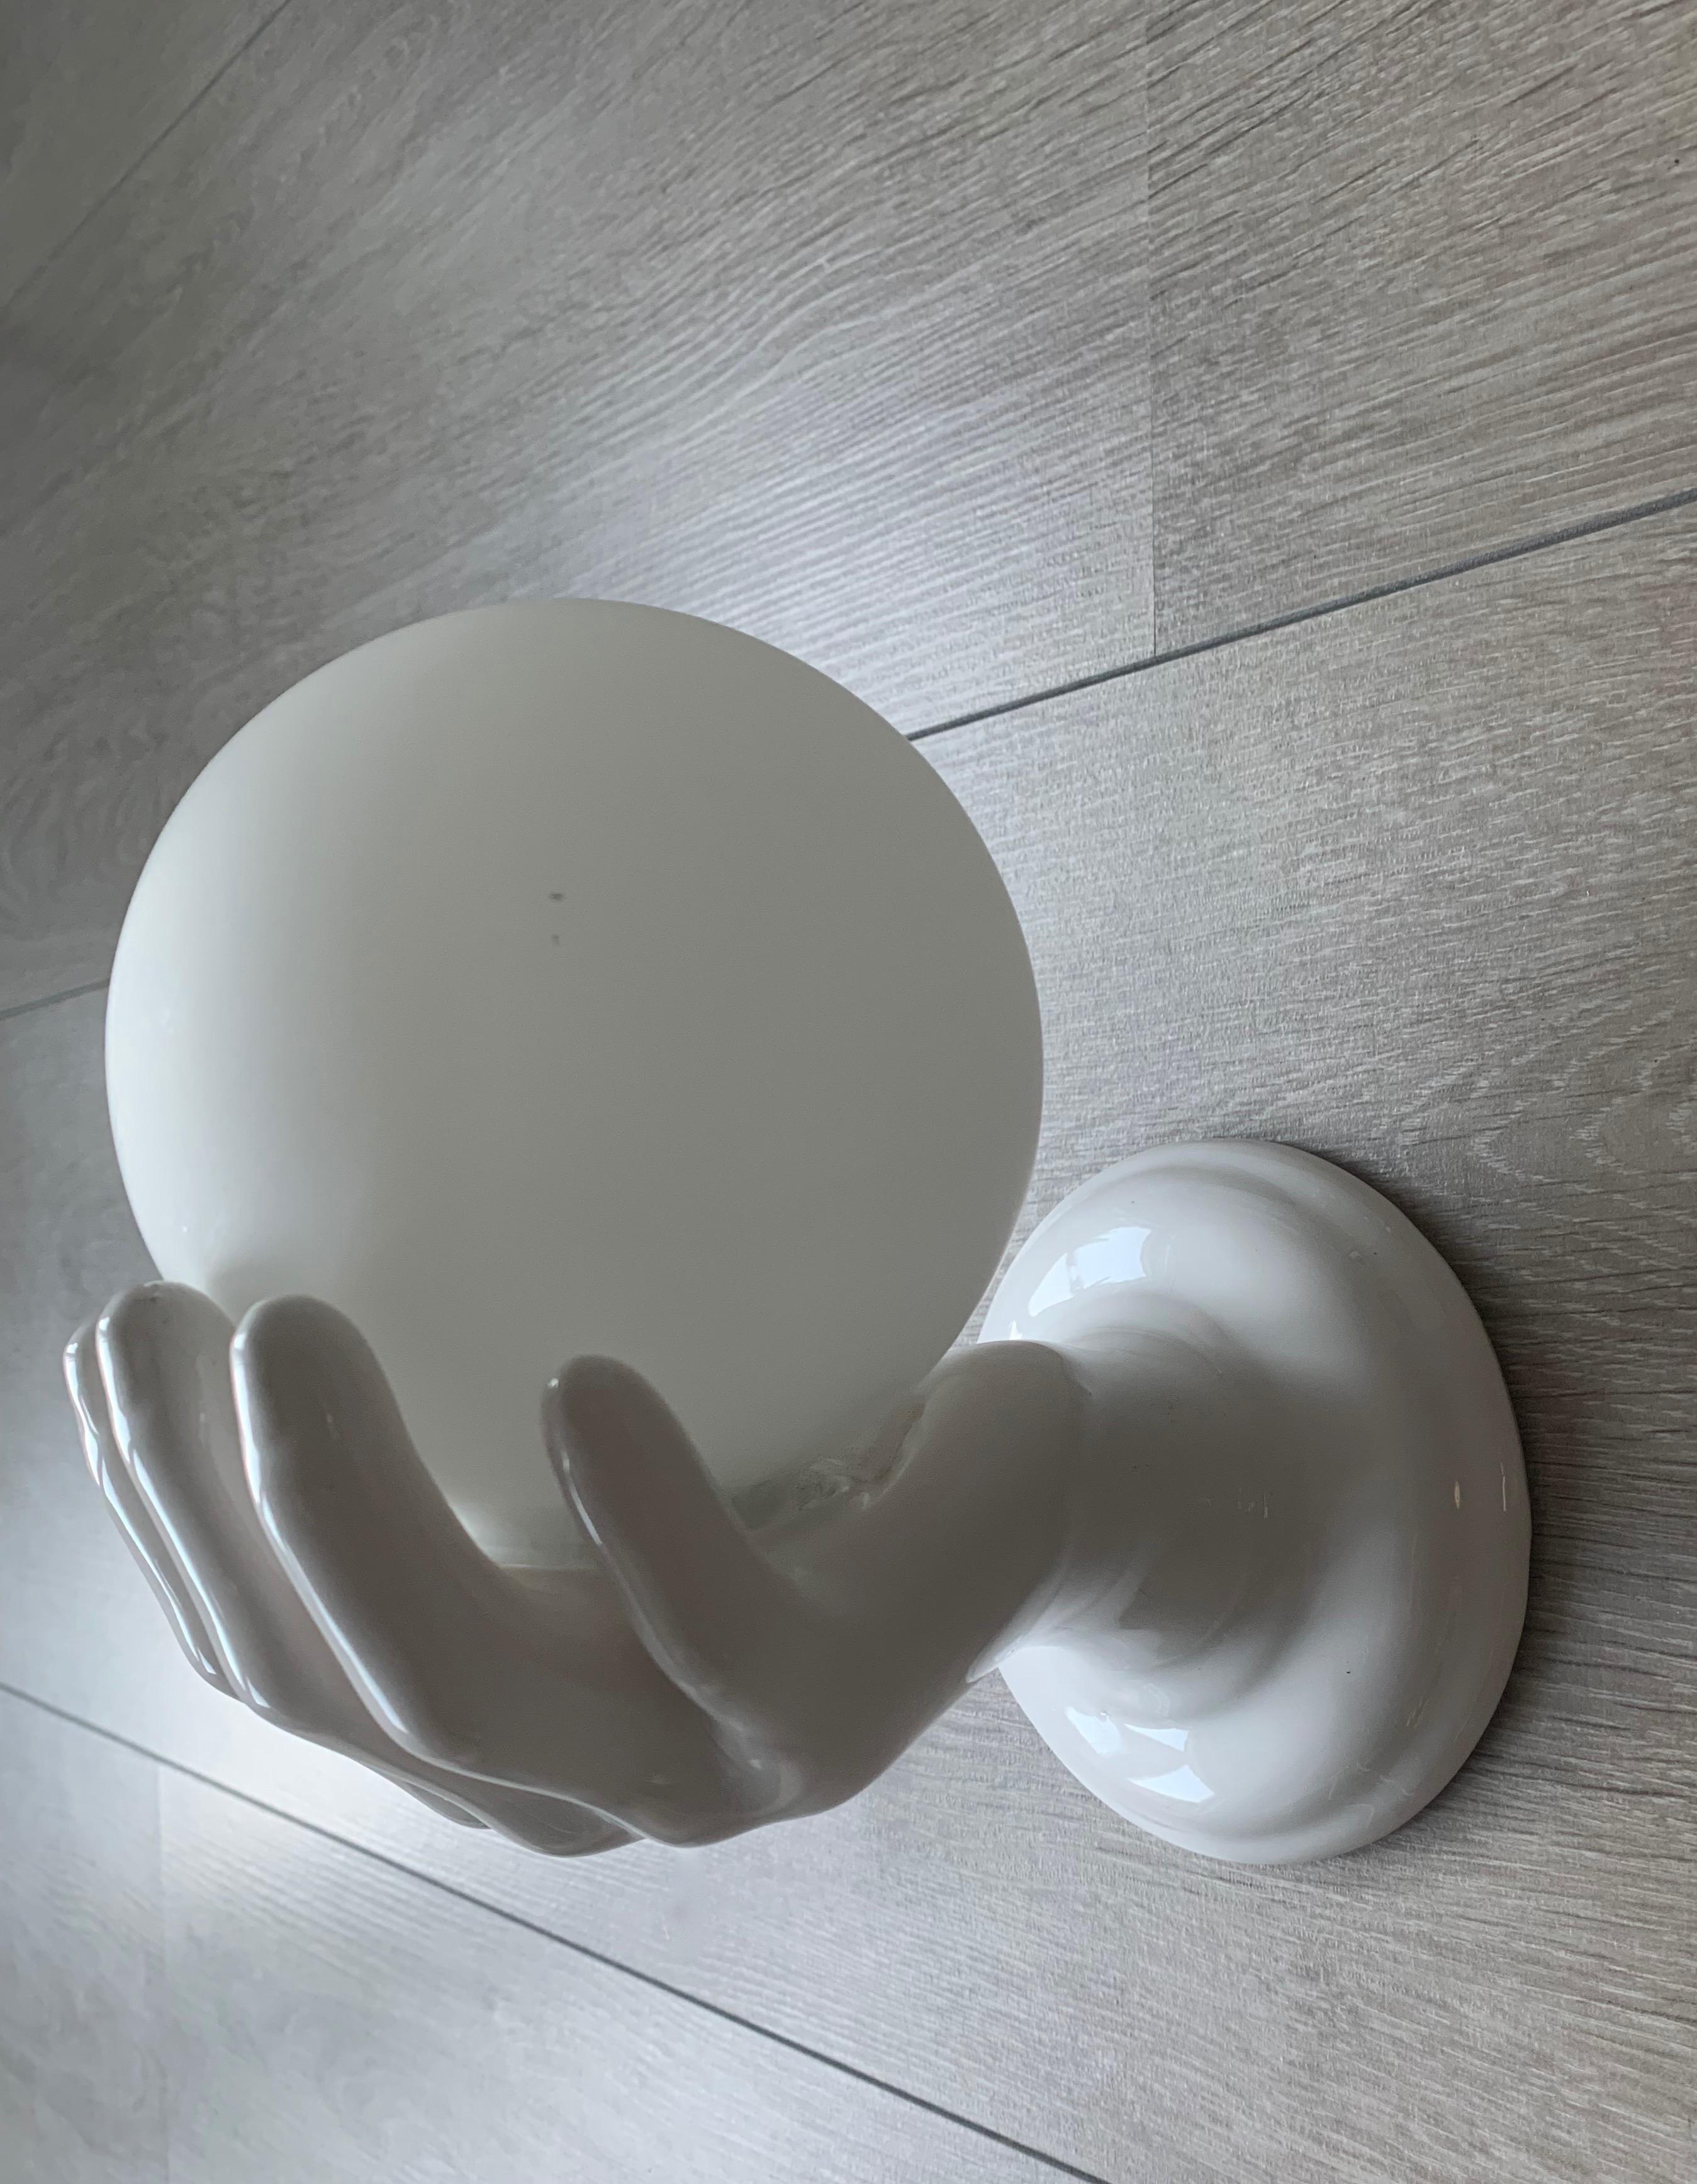 Modern 1970s Glazed White Ceramic Hand Holding a Glass Globe Wall Sconce or Wall Light